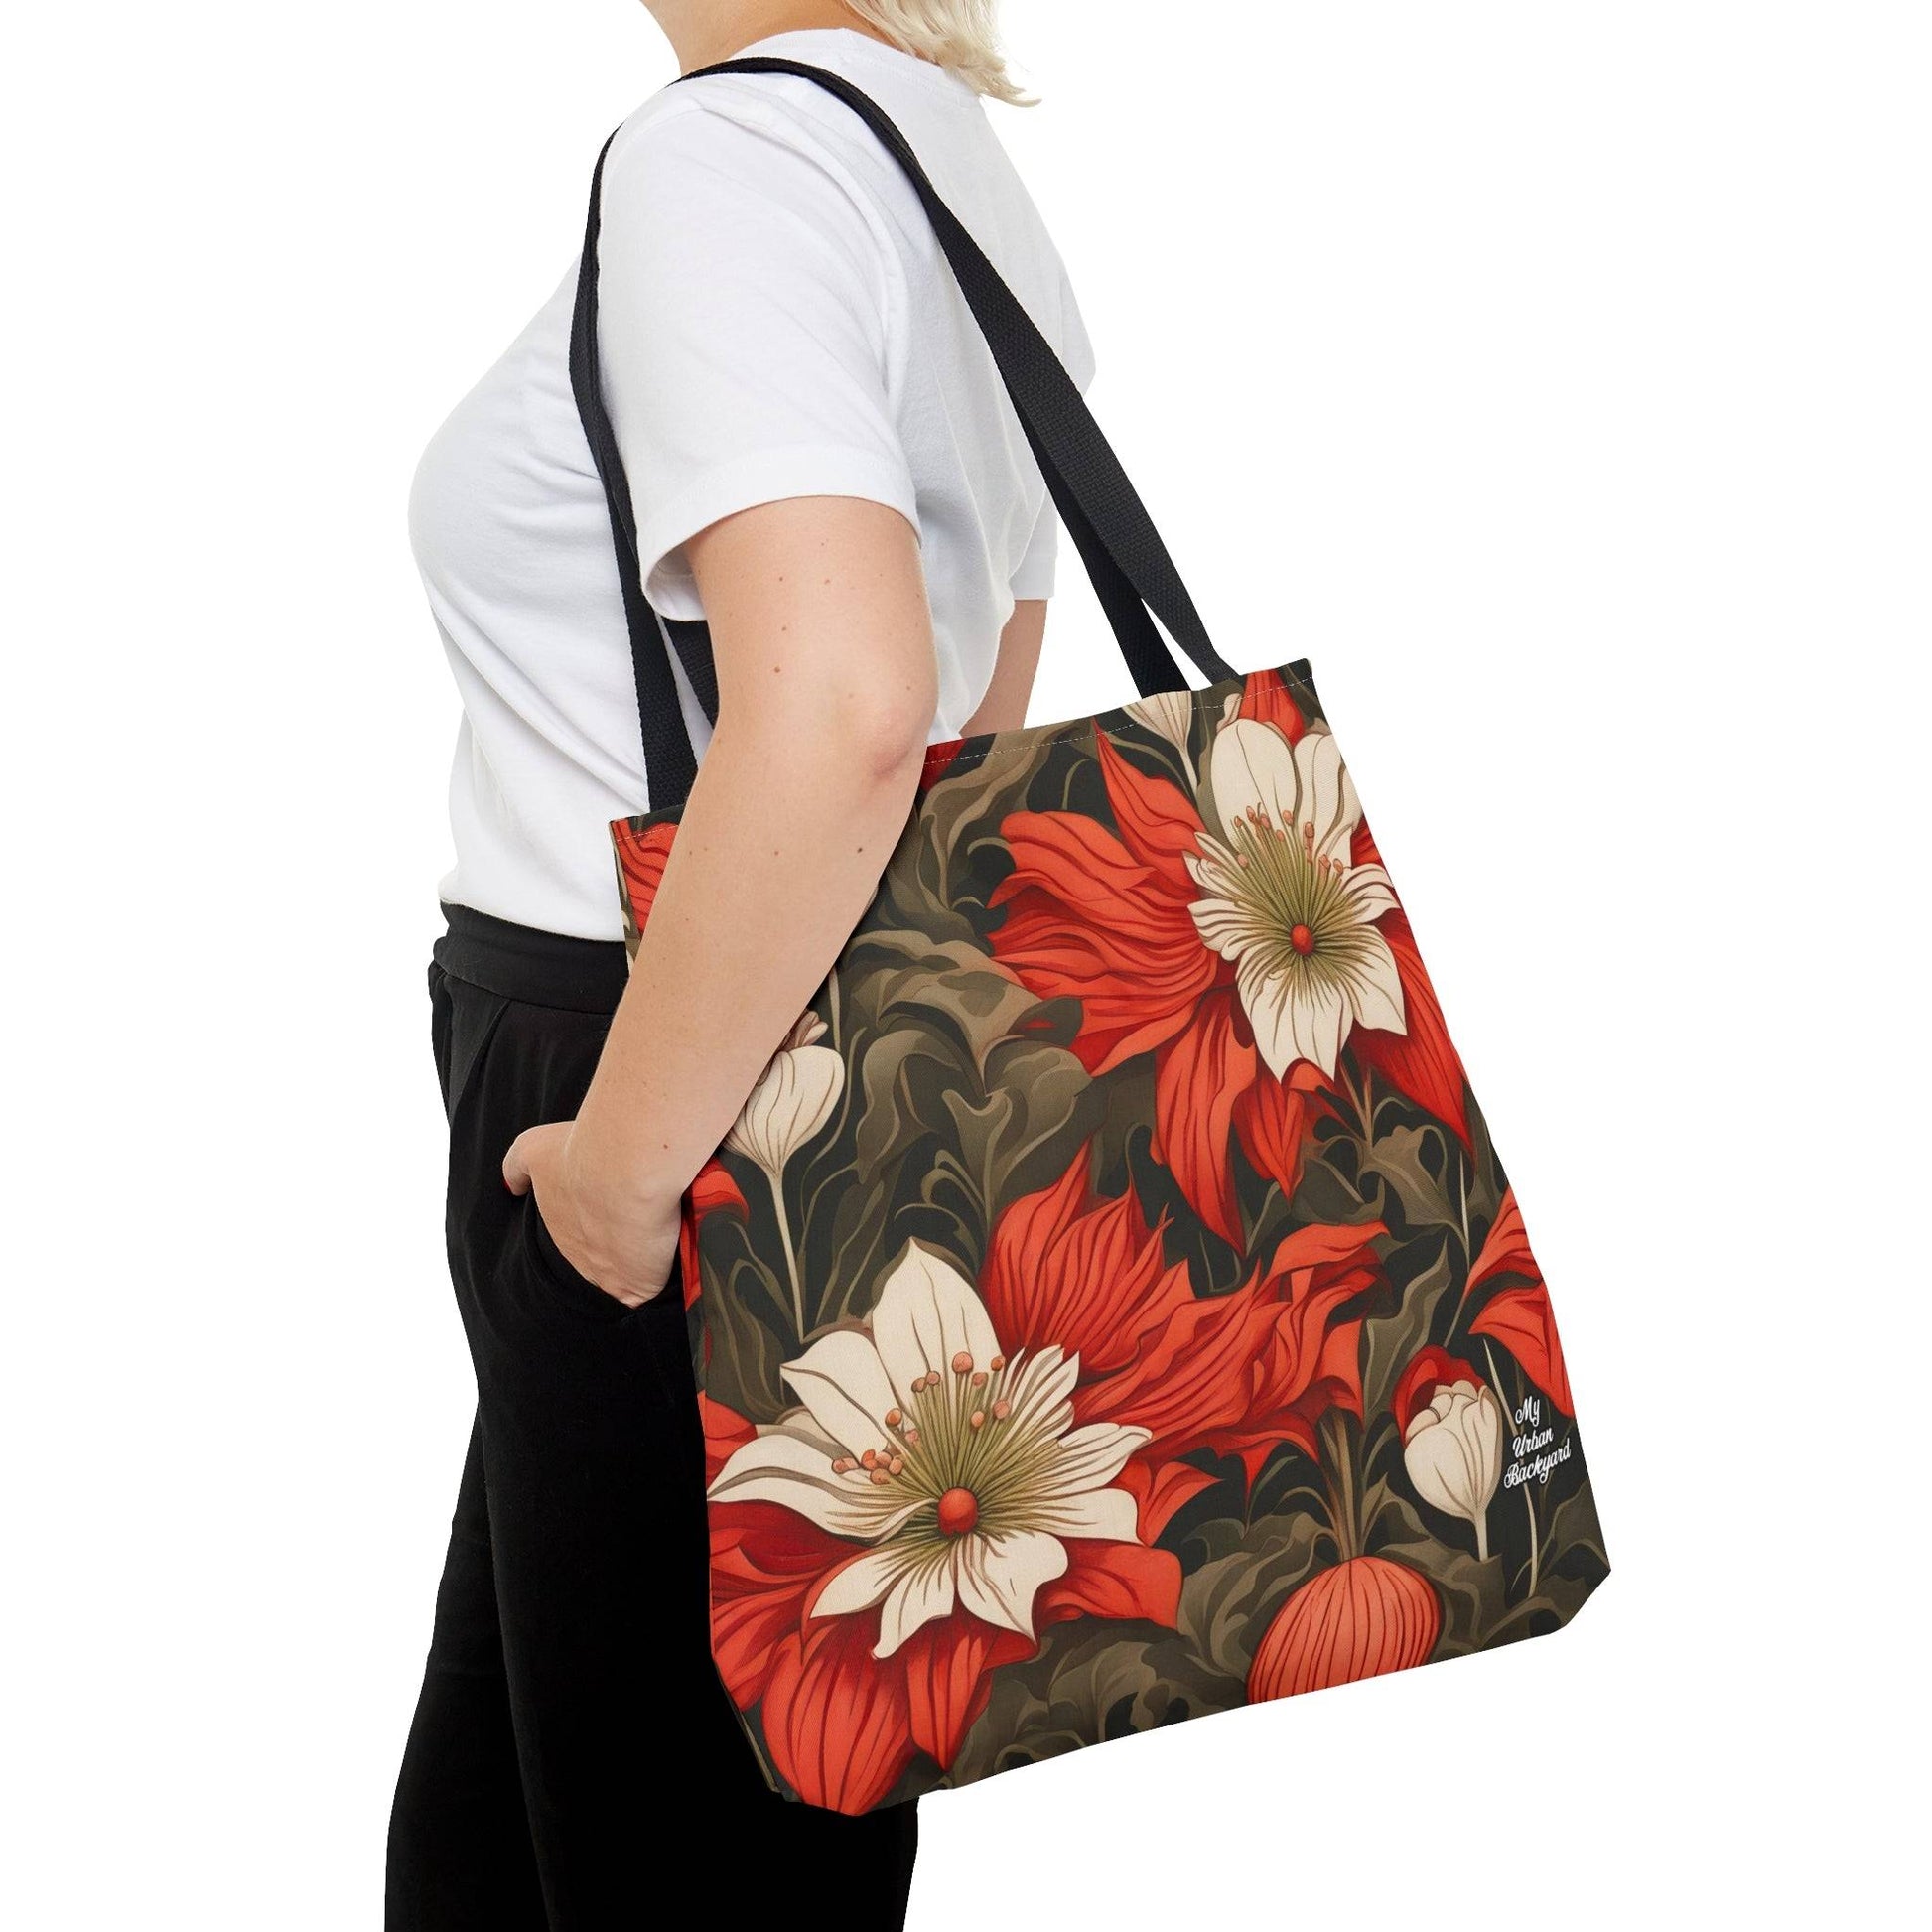 Everyday Tote Bag w Cotton Handles, Reusable Shoulder Bag, Holiday Flowers